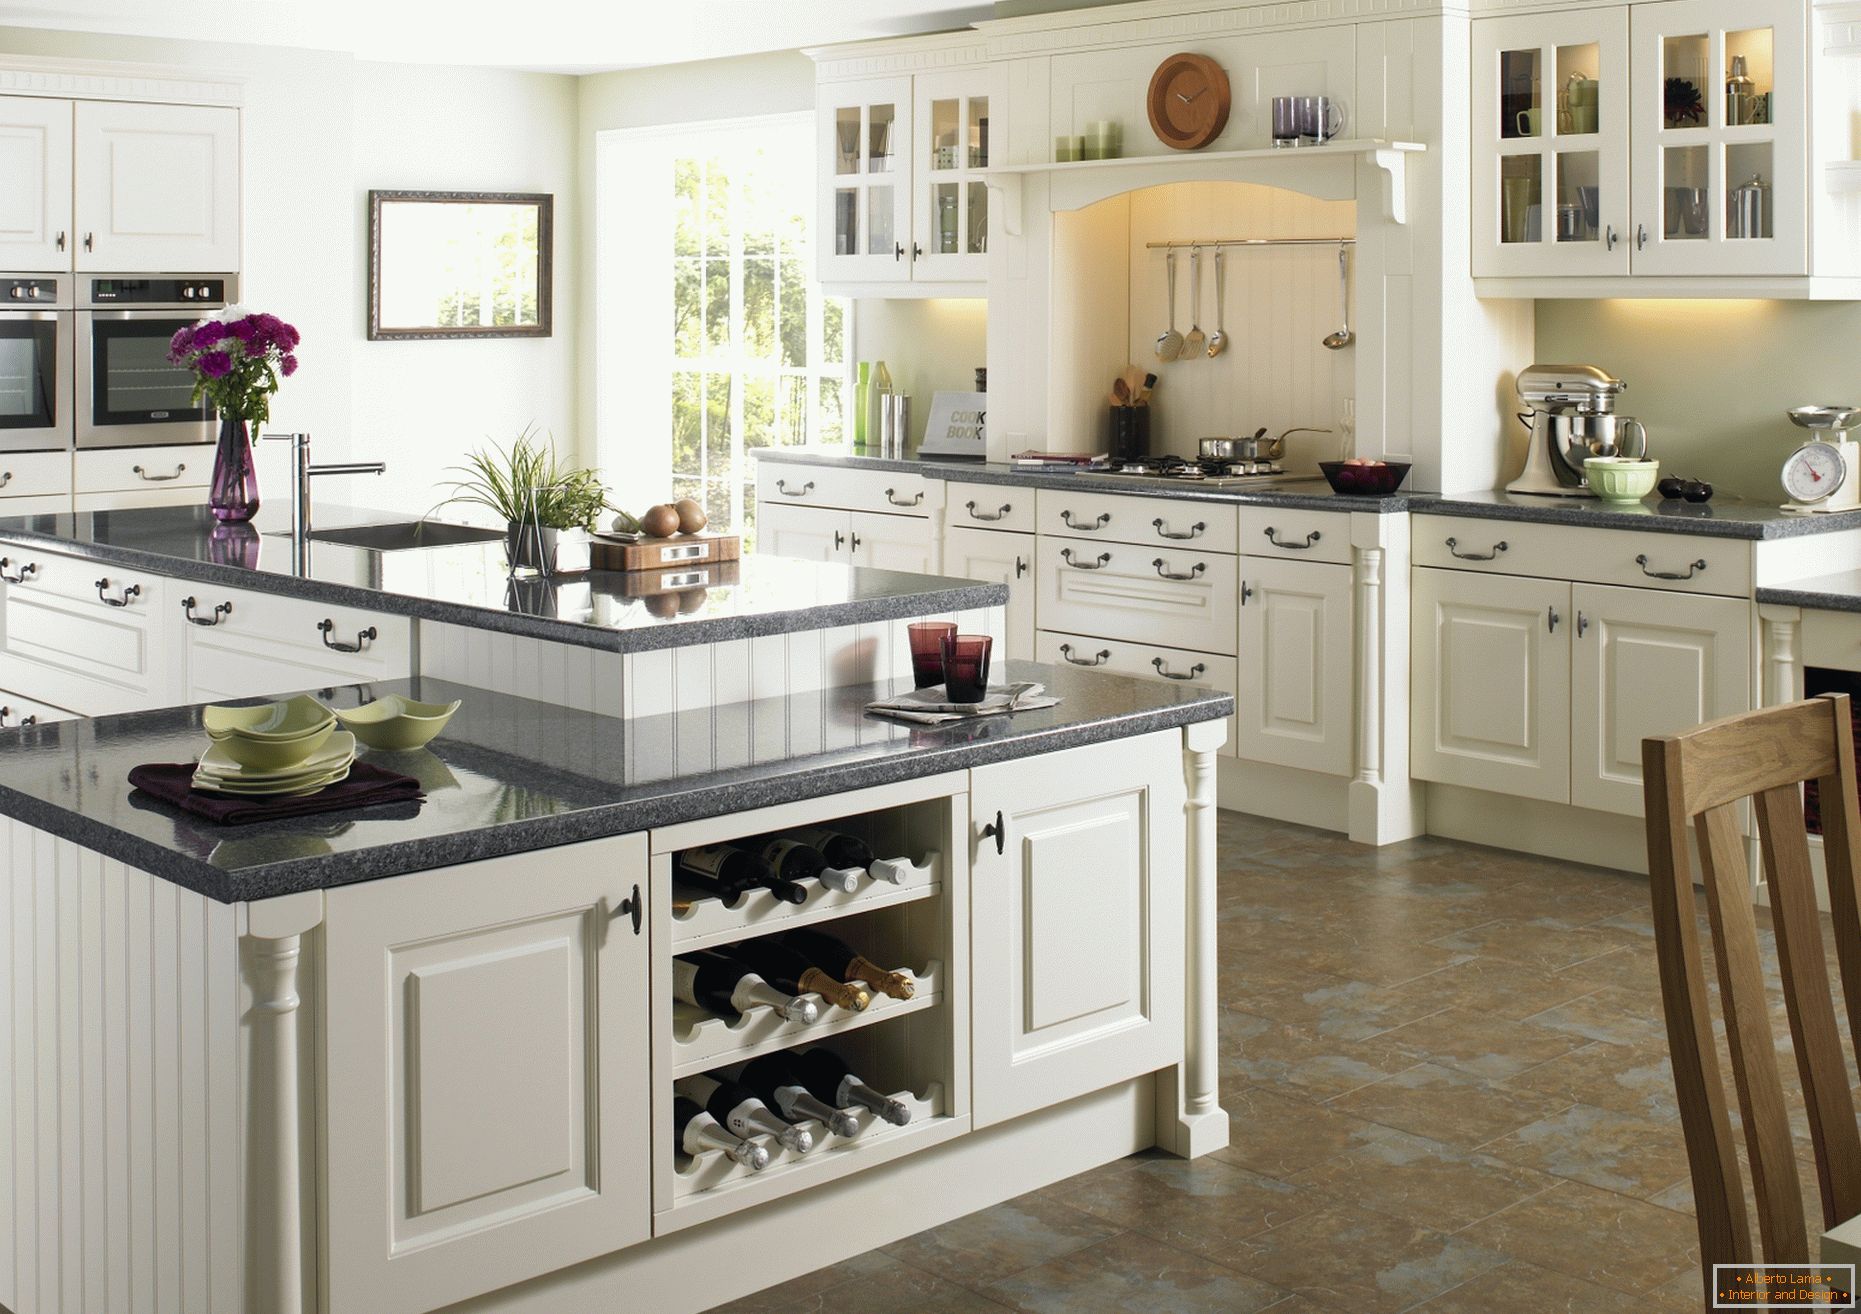 Design of a one-color kitchen